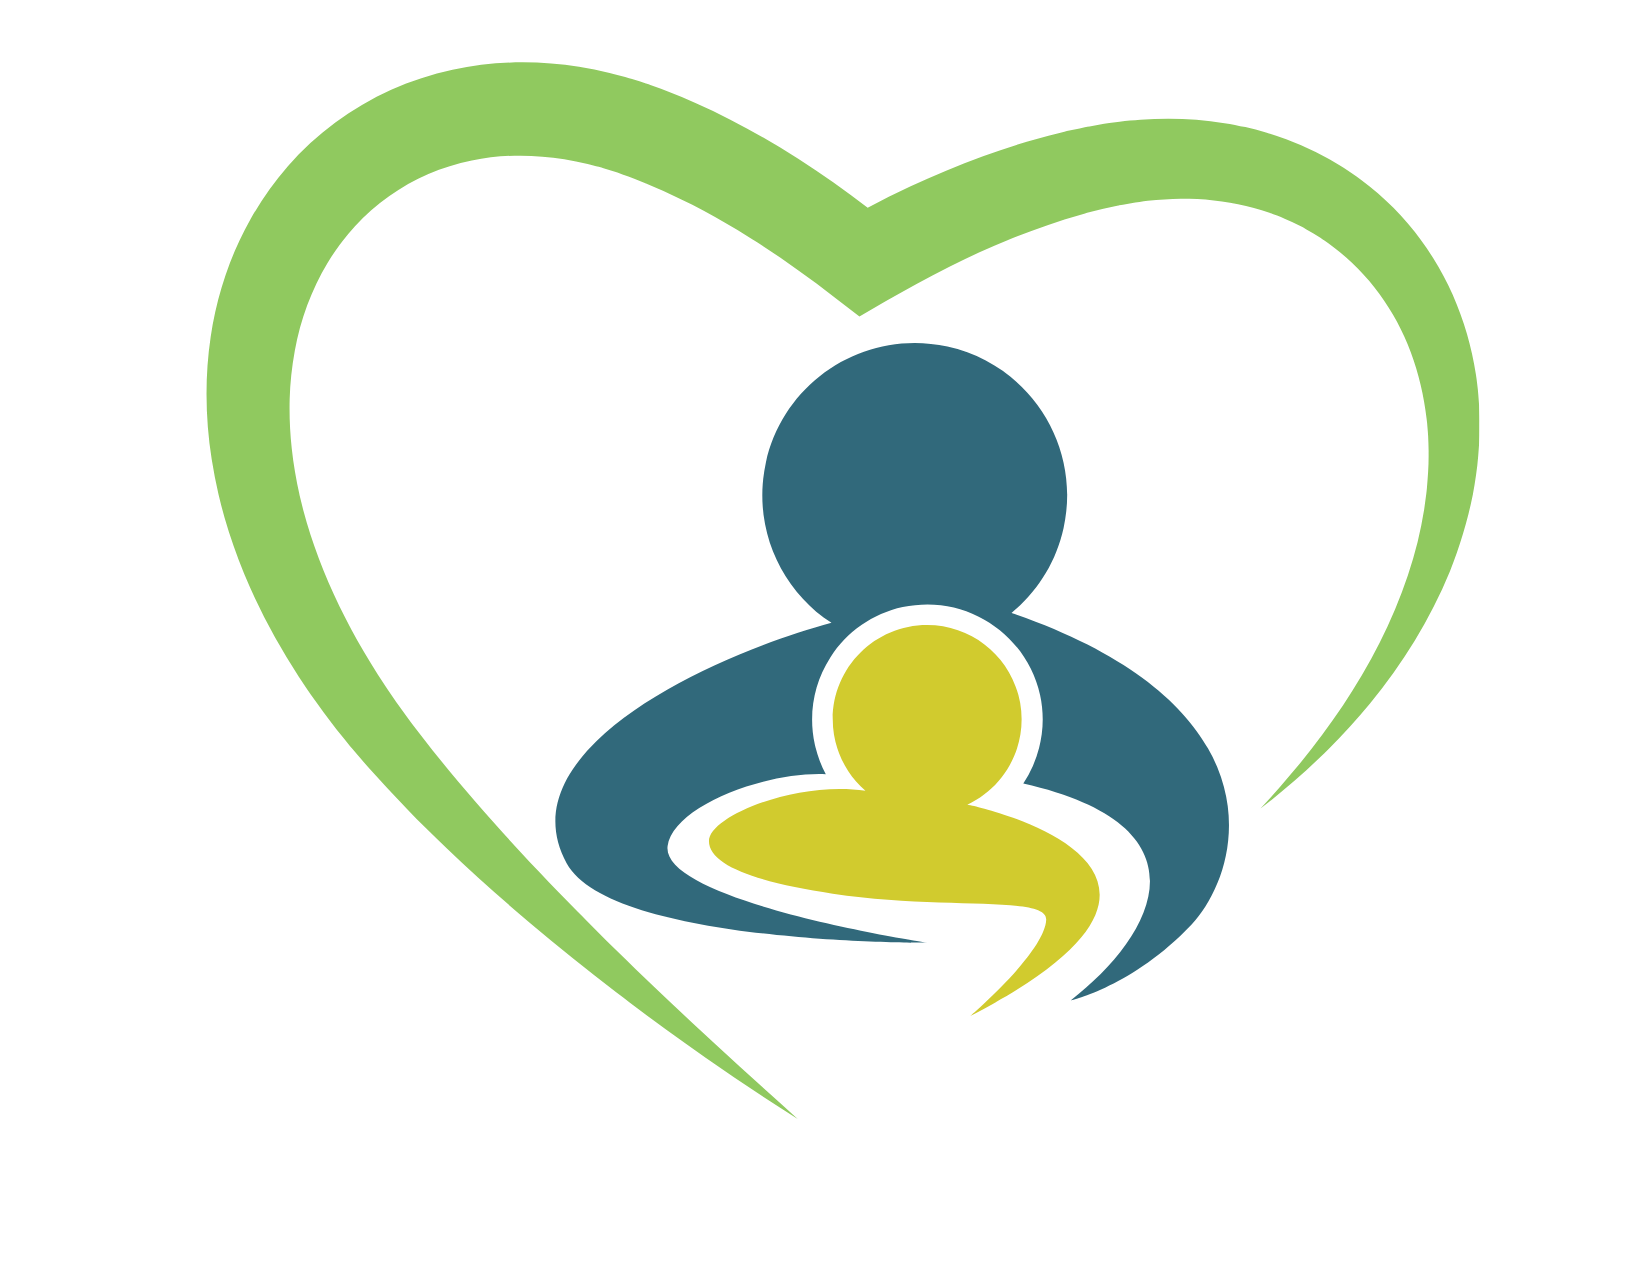 stylized illustration of parent holding a baby that makes the shape of a heart